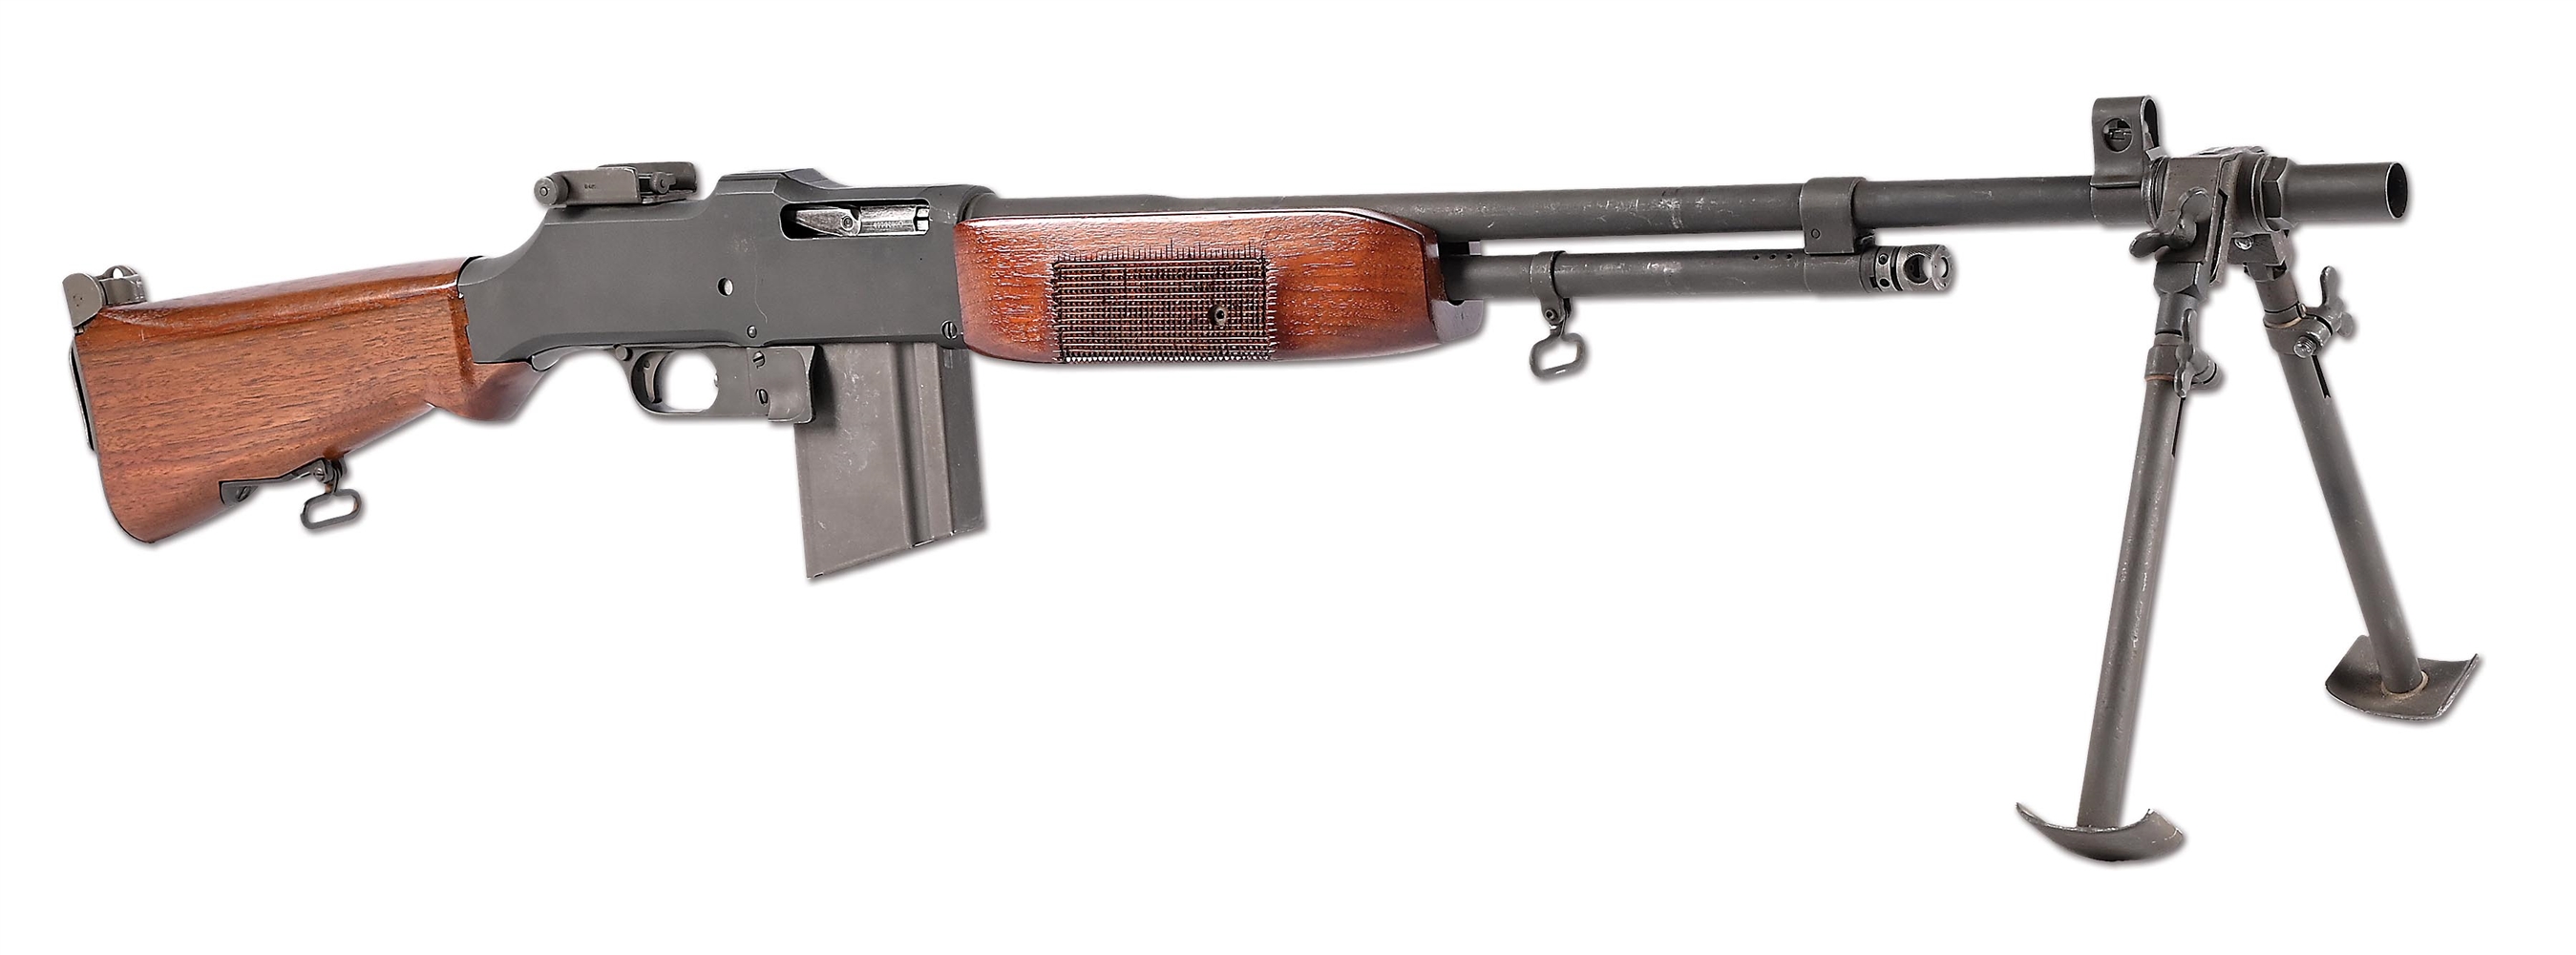 (N) EXTREMELY ATTRACTIVE GROUP INDUSTRIES MODEL 1918A2 BROWNING AUTOMATIC RIFLE B.A.R.  (FULLY TRANSFERABLE).